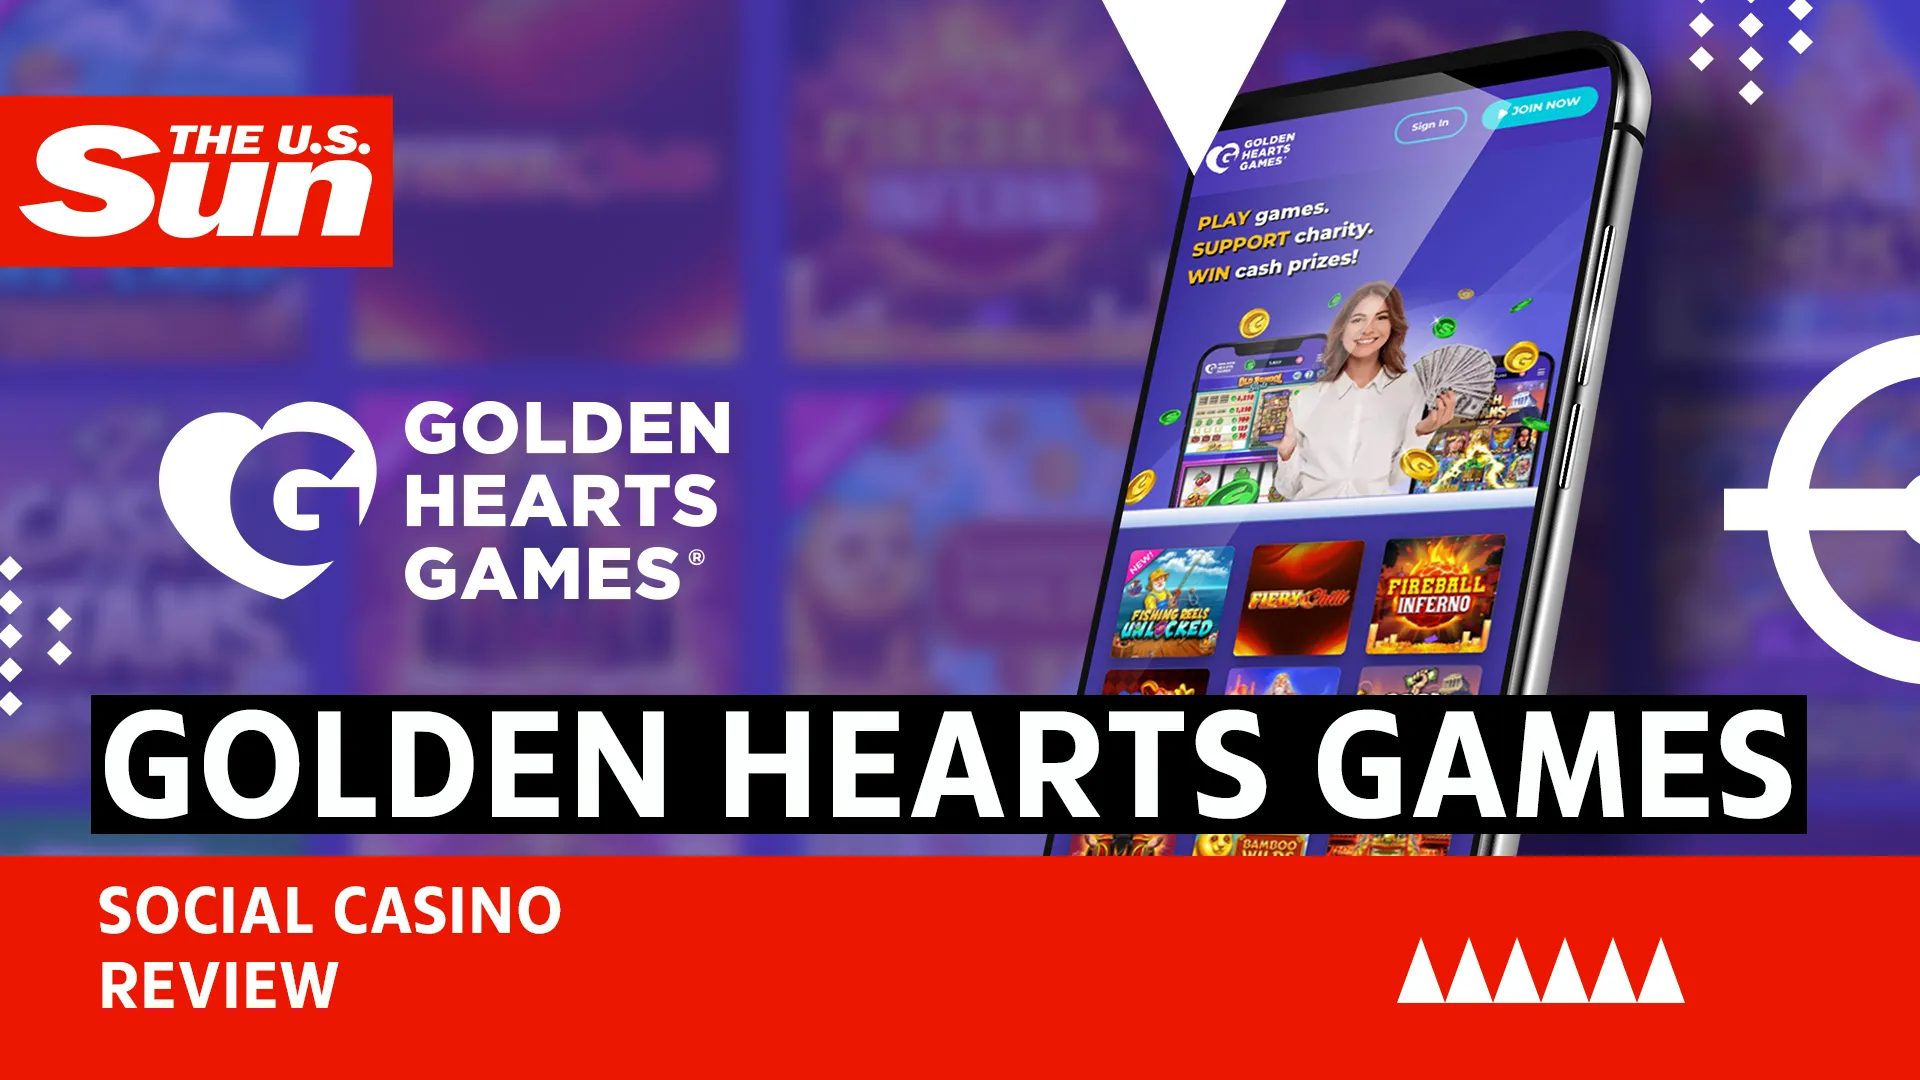 Golden Hearts Games - 500 FREE SC coins at sign-up with code TSGOLD